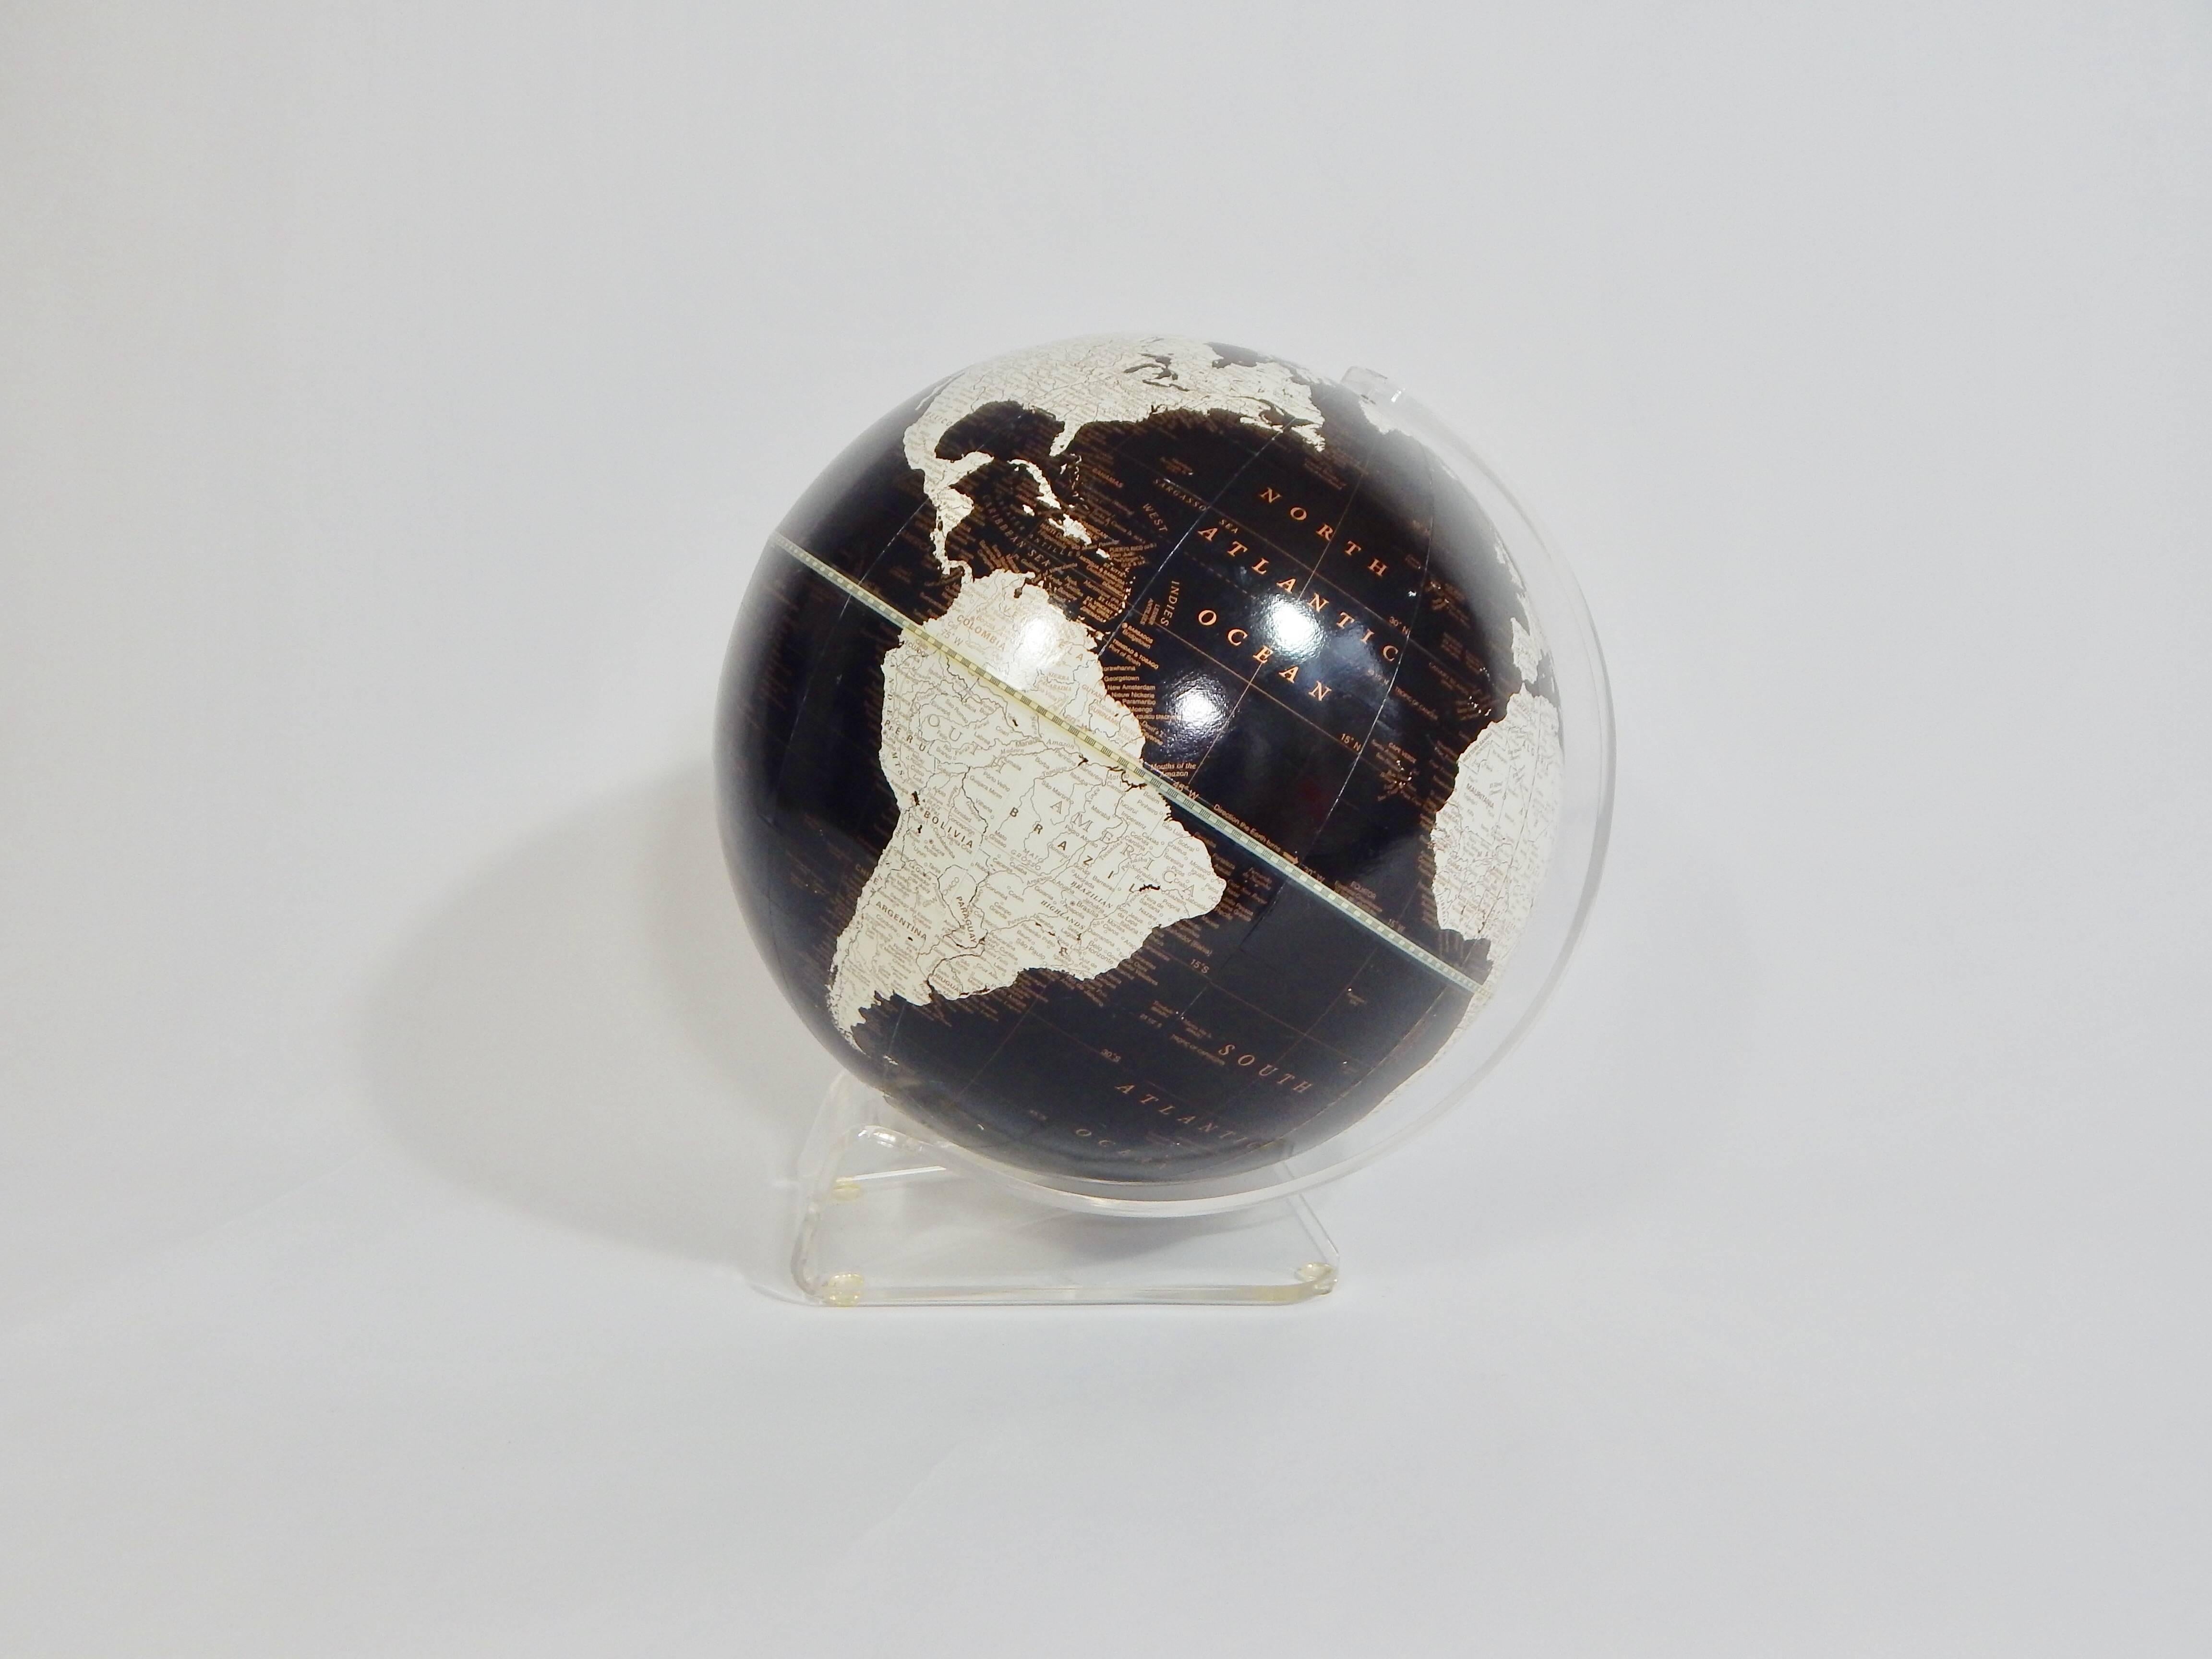 1970s black and white Cram's globe with Lucite stand. Imperial globe by George F Cram Company. Unique chic black and white with hint of gold accents.
Excellent condition.